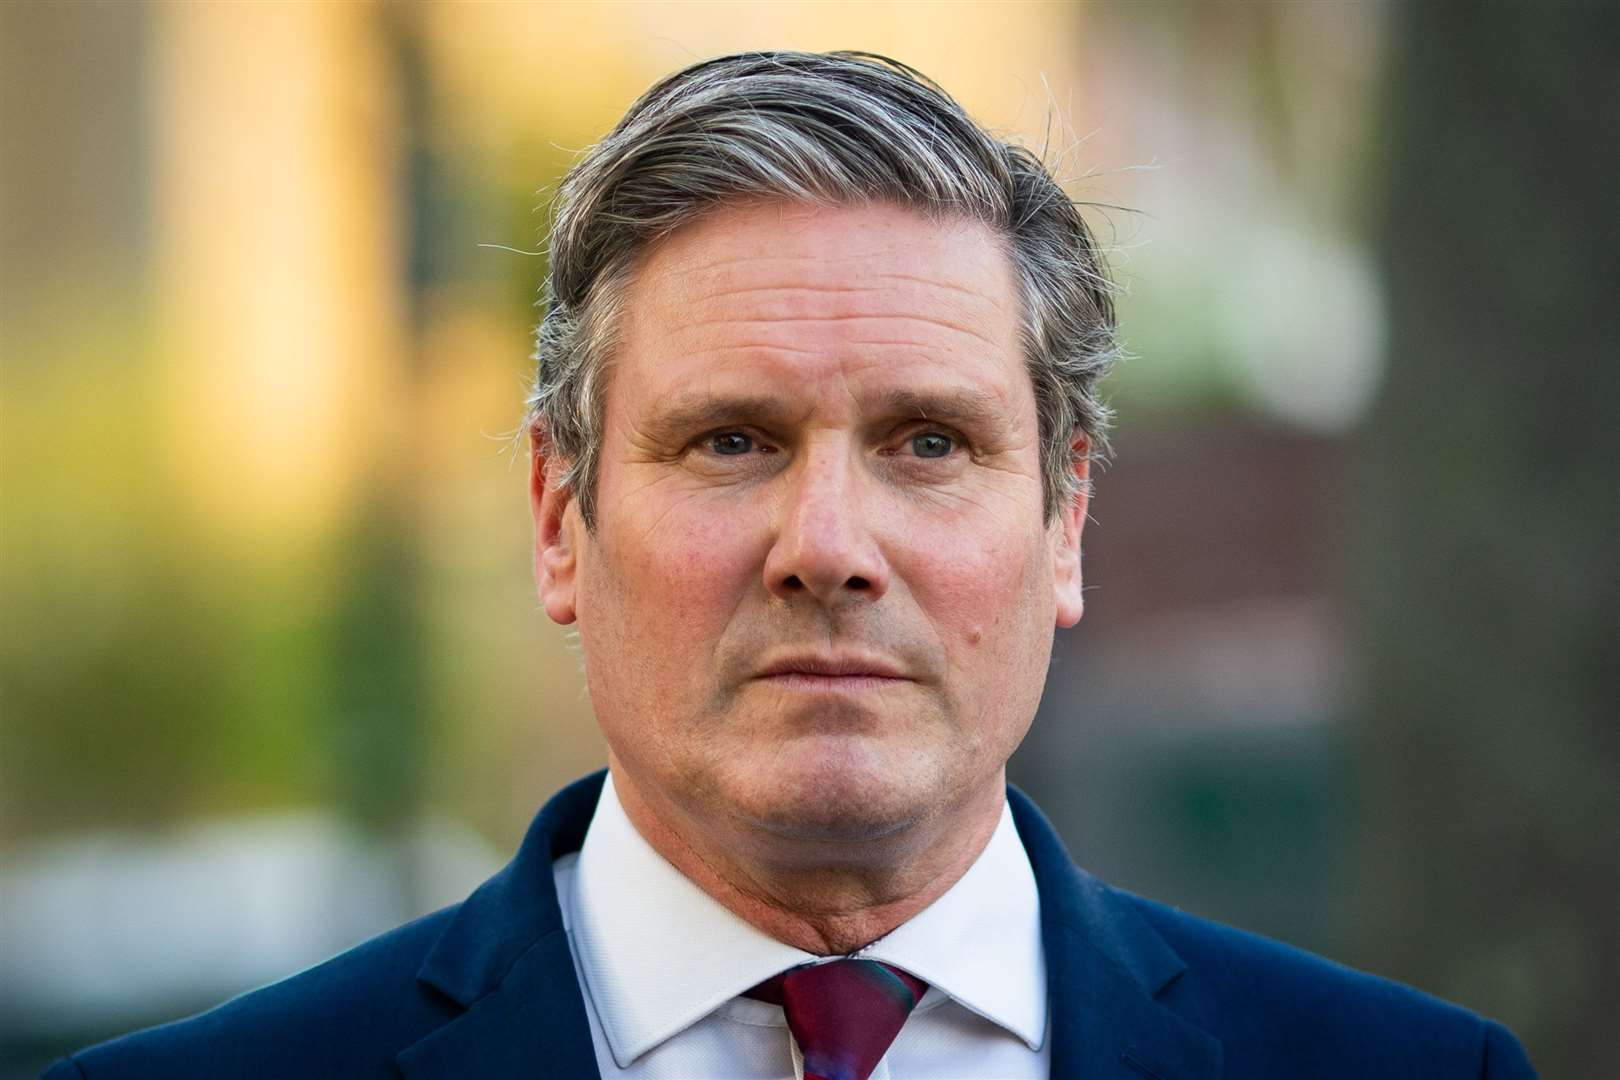 Labour leader Si Keir Starmer says he does not think that legislation is the way to bring an end to industrial disputes